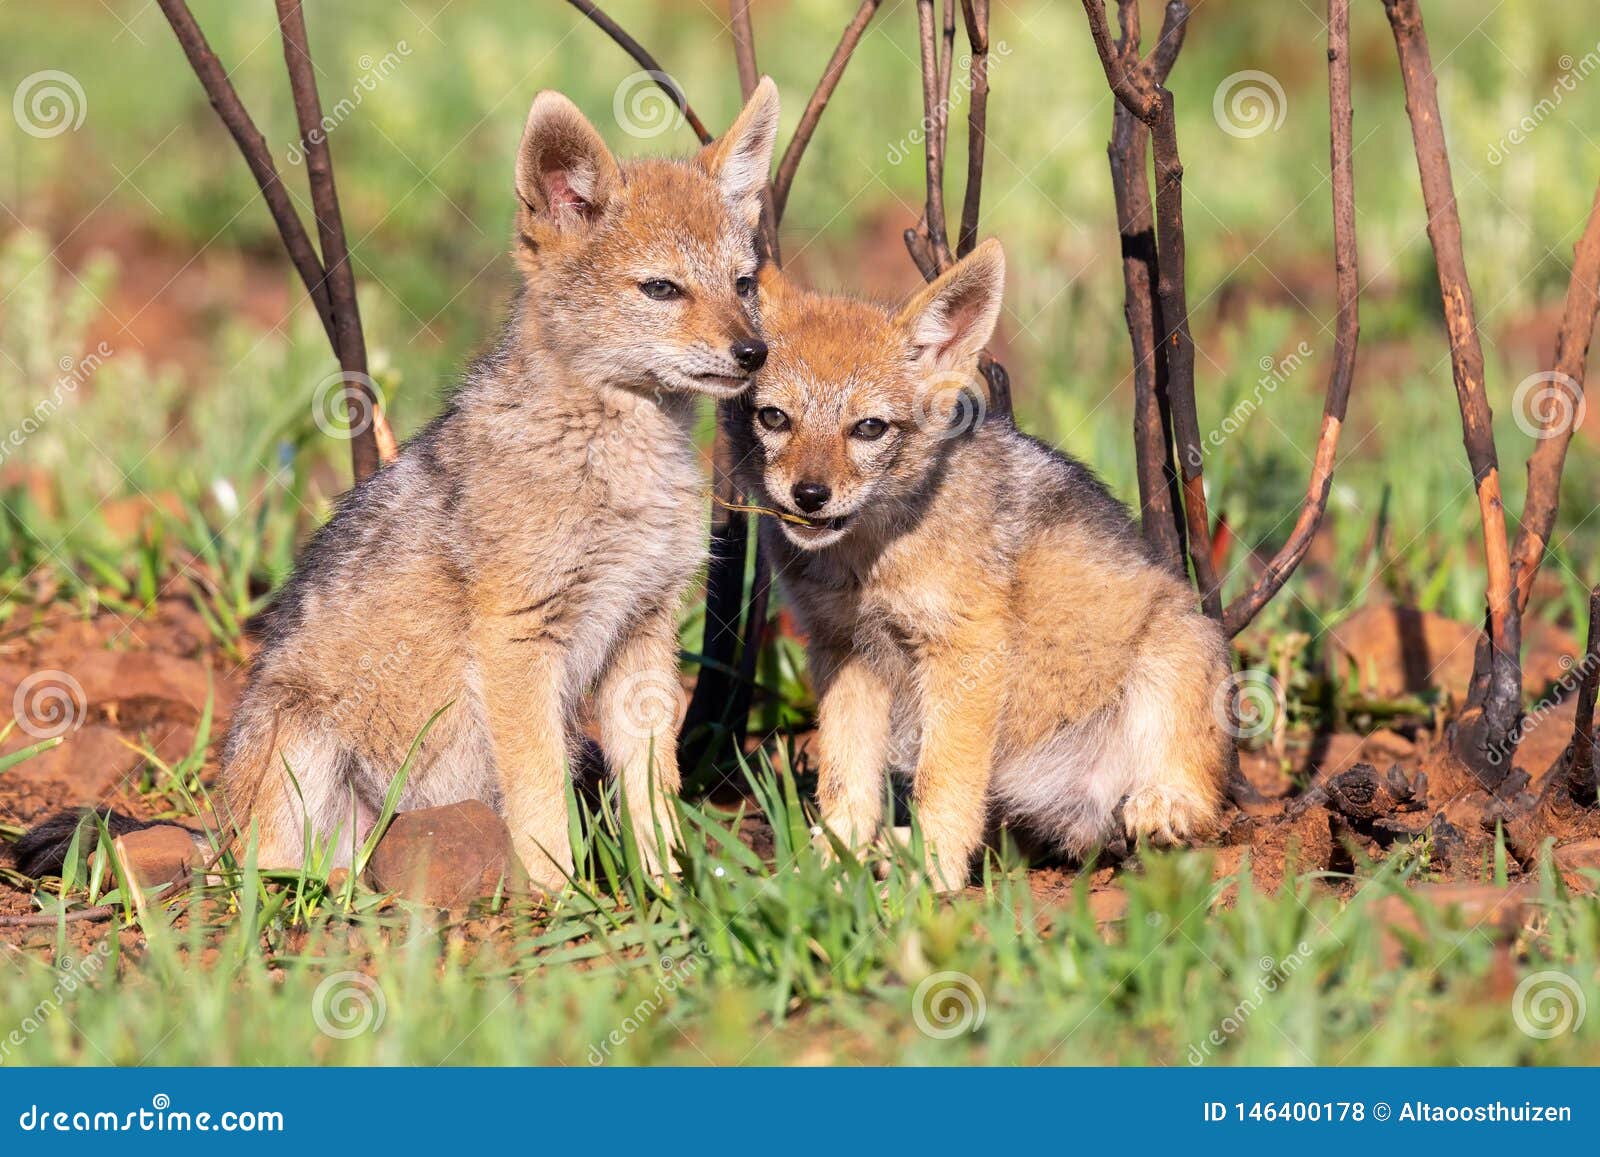 two black backed jackal puppies play in short green grass to develop skills